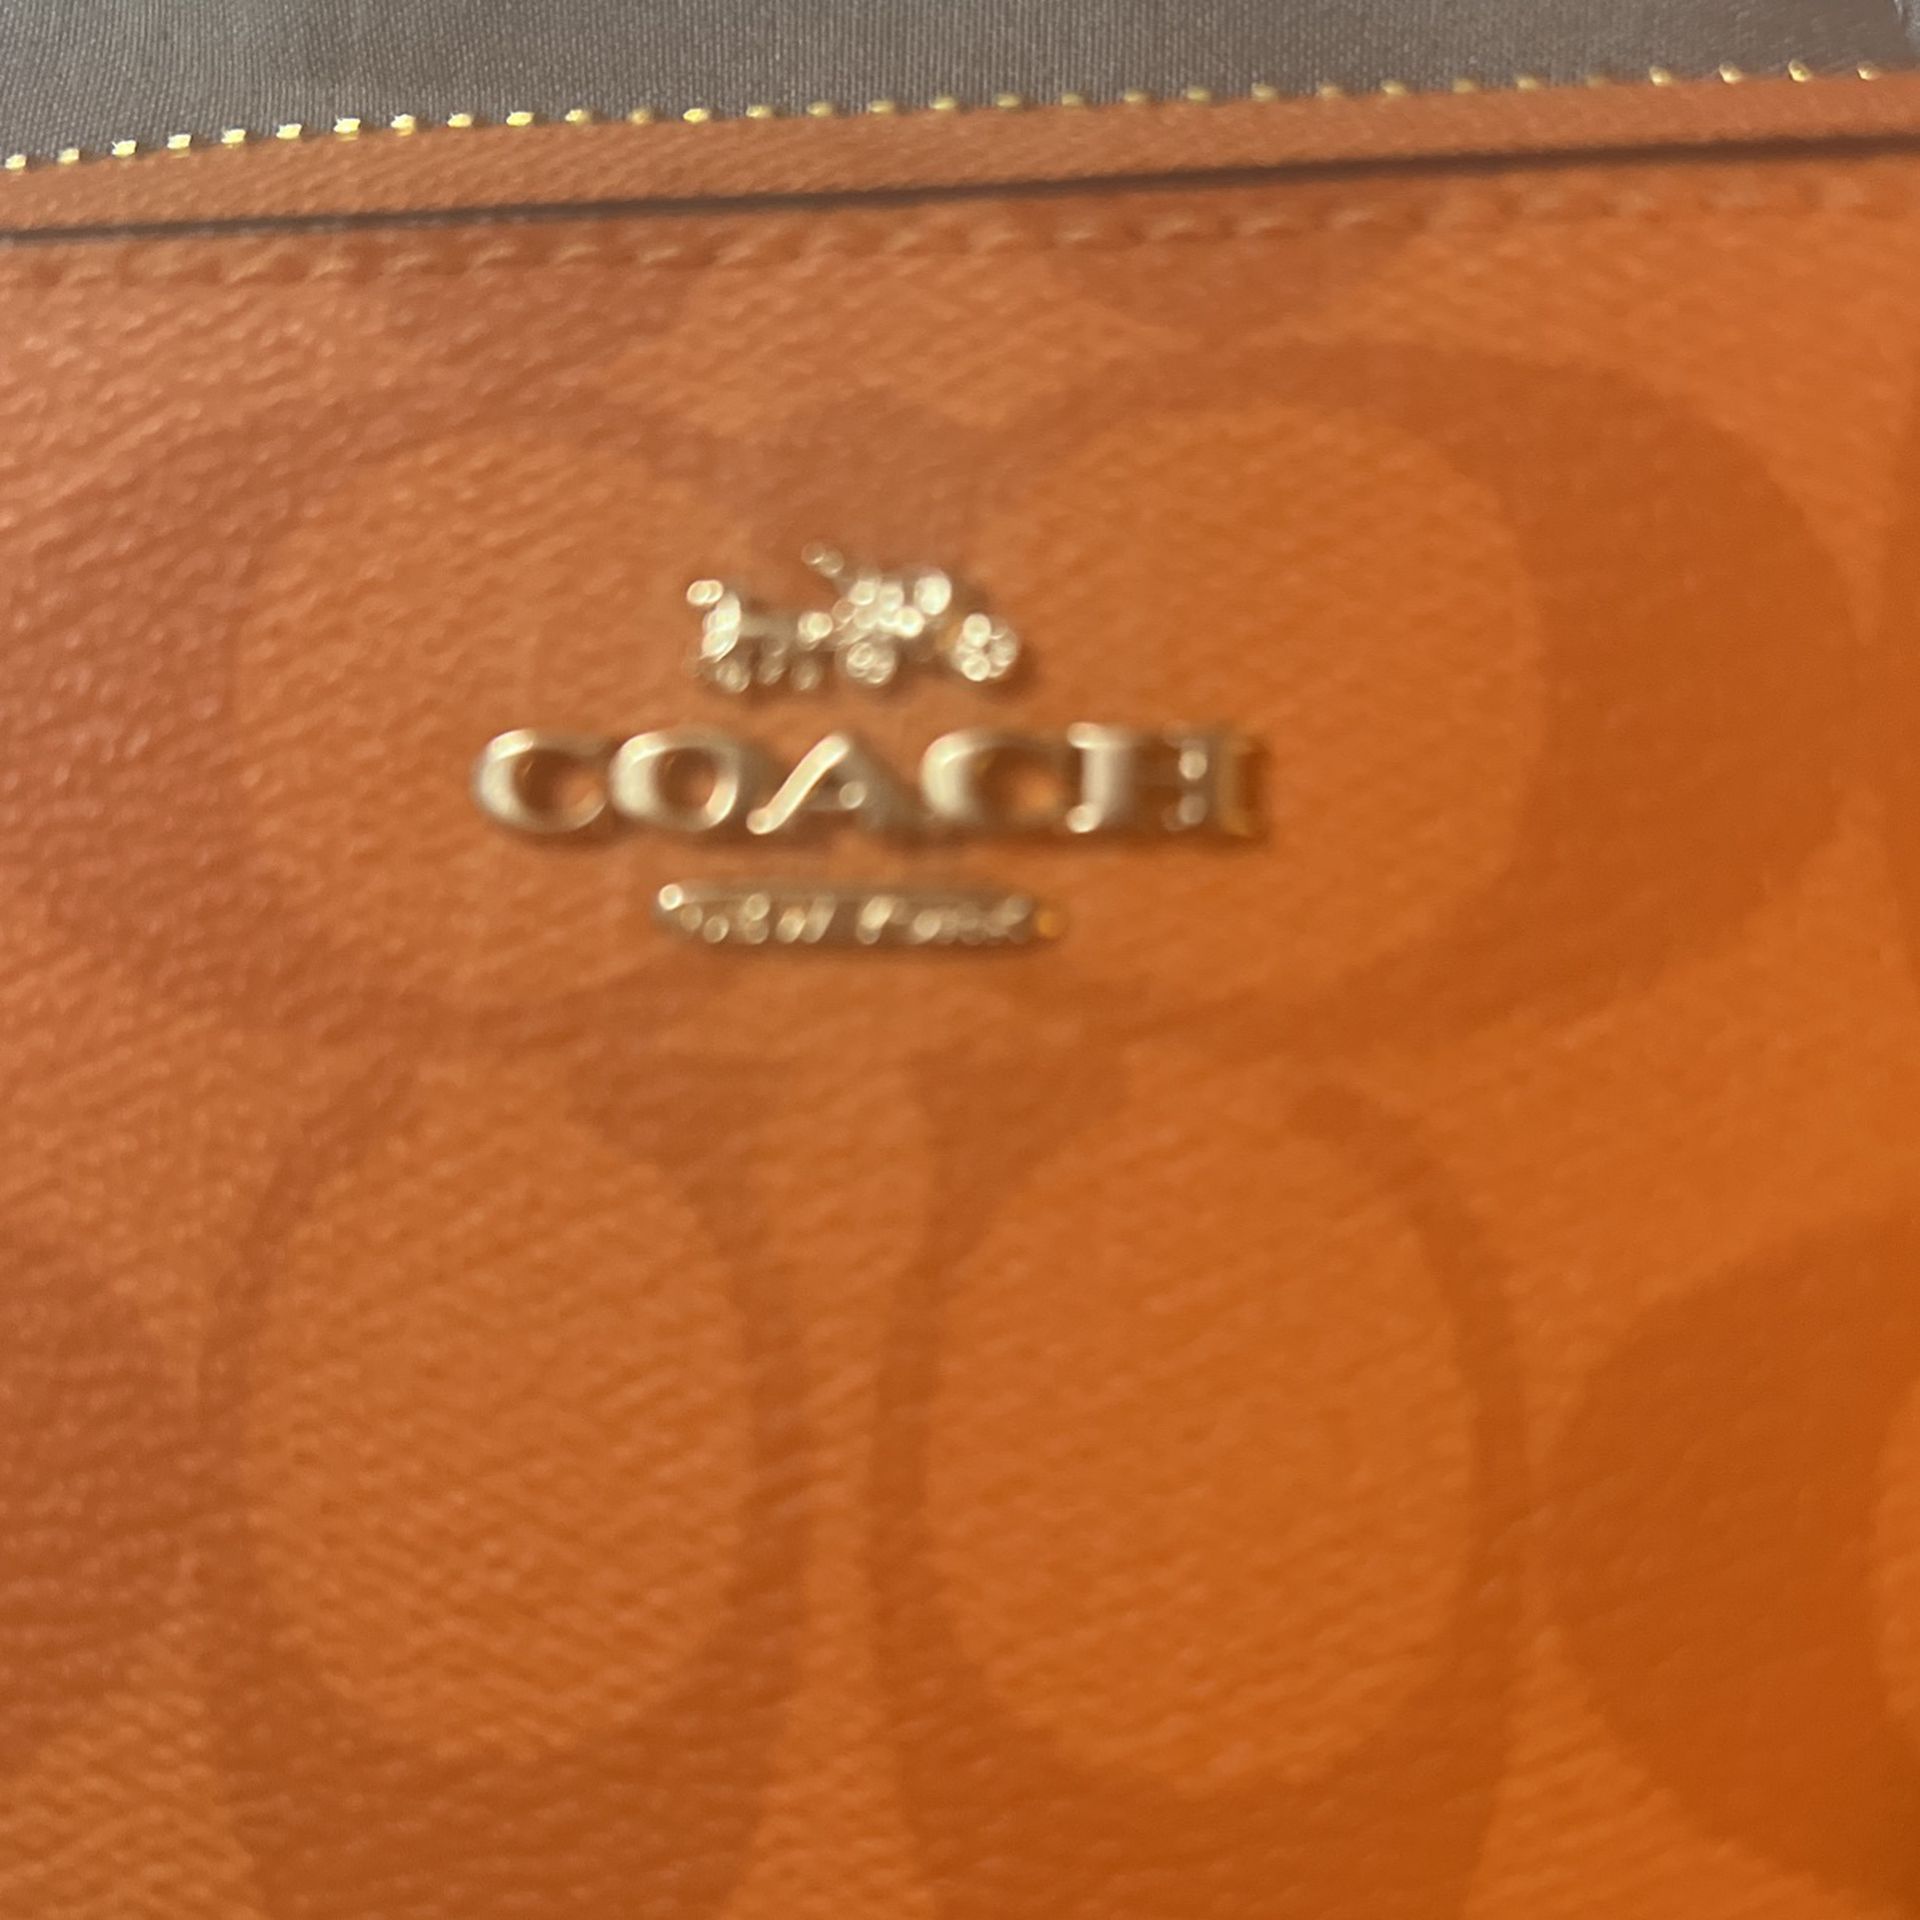 Coach Wallet - IF YOU SEE IT IT’S AVAILABLE!